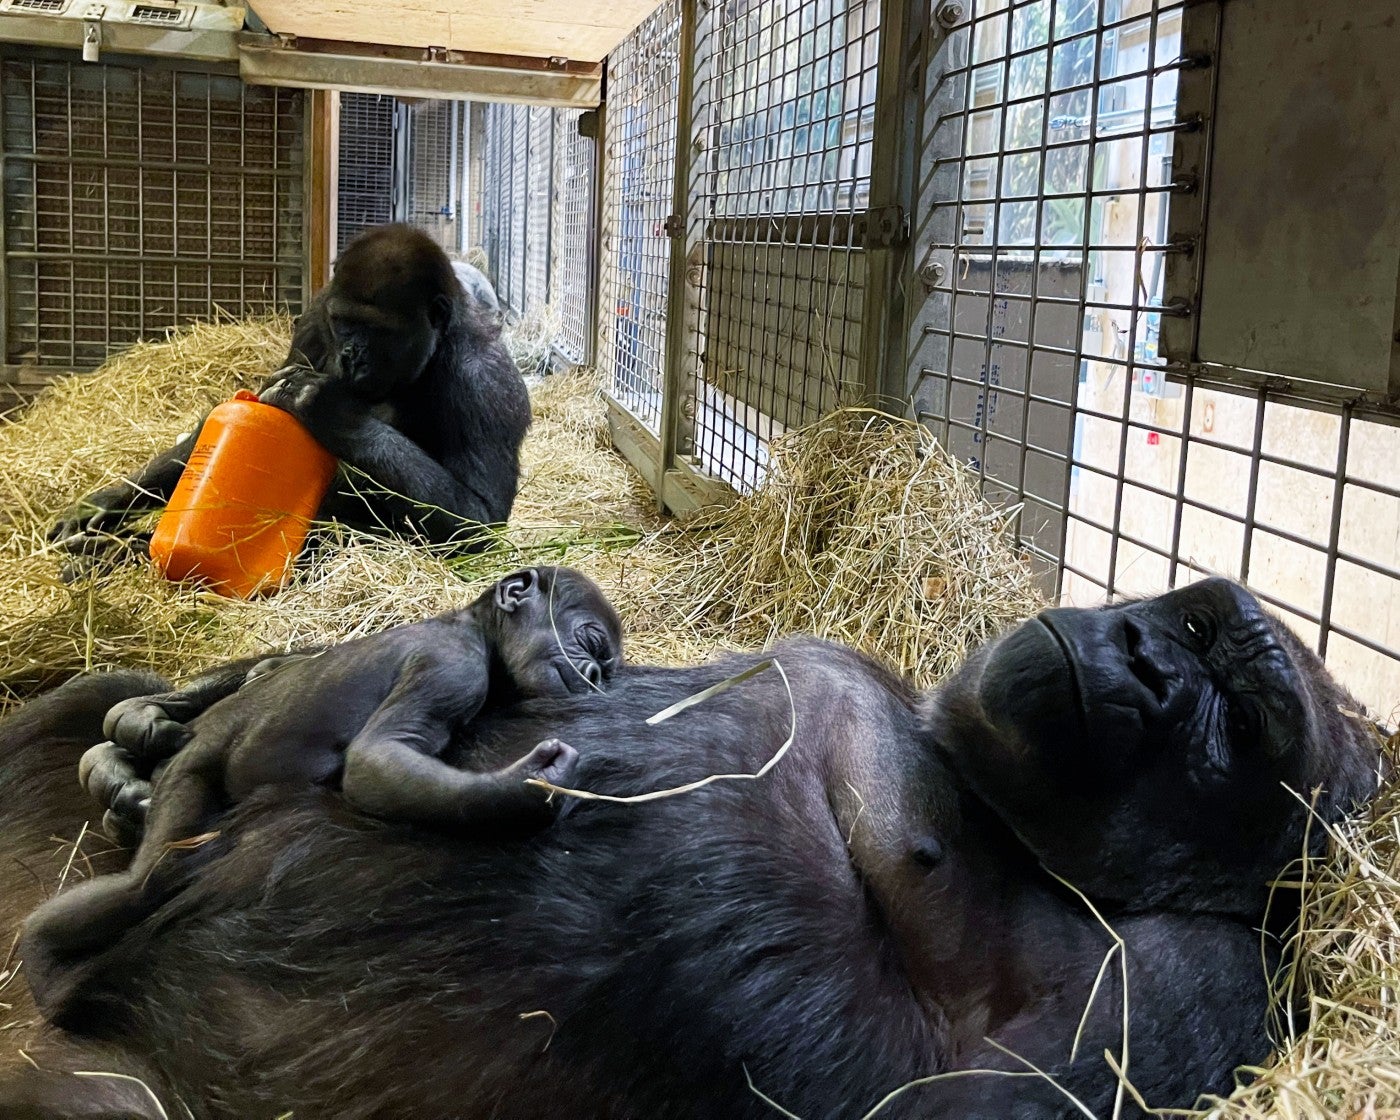 Gorilla mother Calaya rests in a nest of hay holding her daughter, Zahra. Her son Moke sits in a nearby nest, playing with an orange enrichment item. 